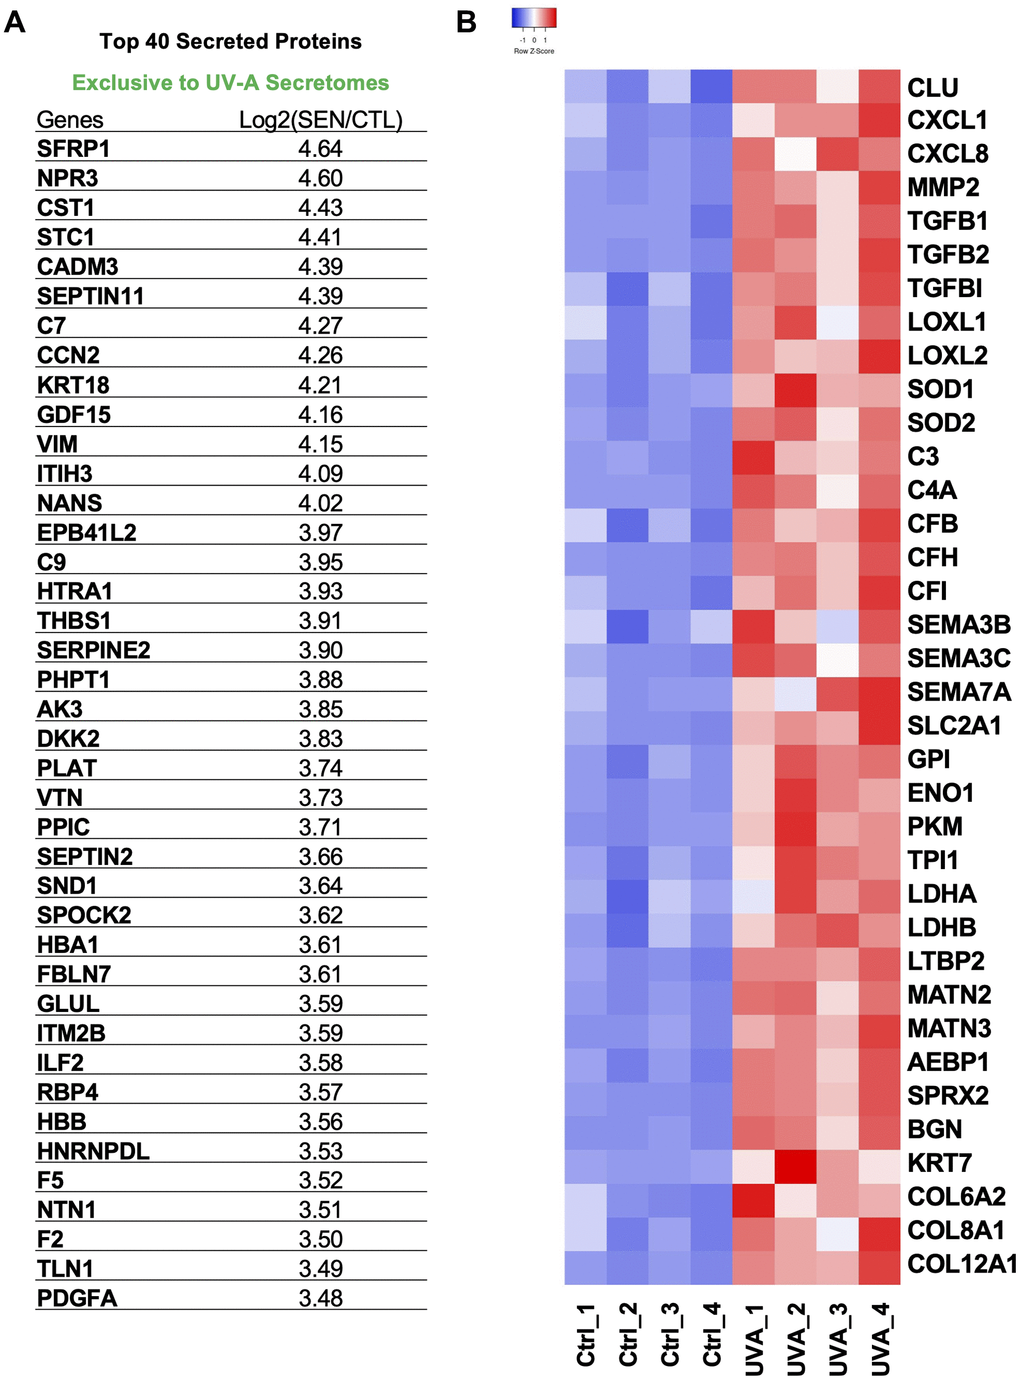 Protein signatures of SASP factors in UV-A-induced senescent human corneal endothelial cells. (A) Table of top 40 SASP proteins in UV-A induced senescence. (B) Heatmap of SASP proteins, which were picked and normalized by Z-score. Red: up-regulated expression. Blue: down-regulated expression.